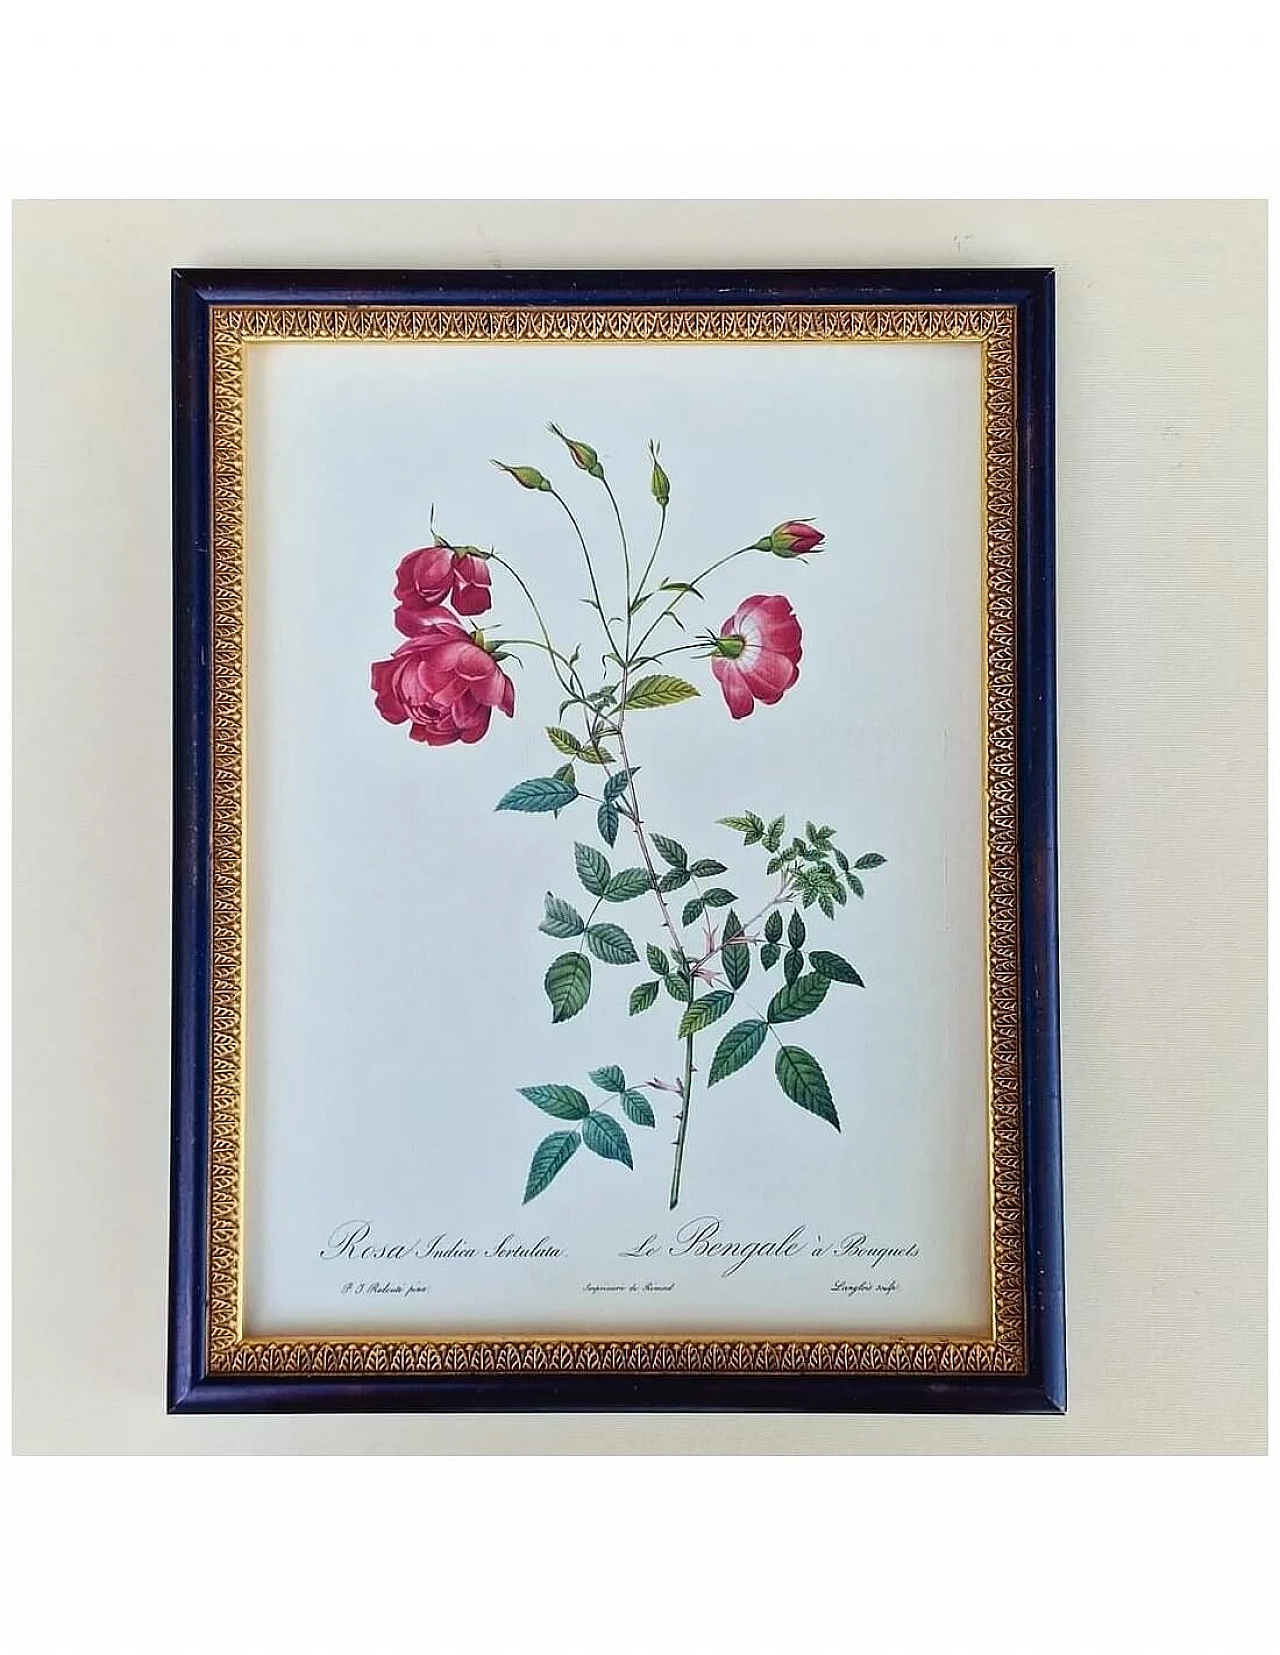 Pierre-Joseph Redouté, Rose, etching with black frame, 1959 13